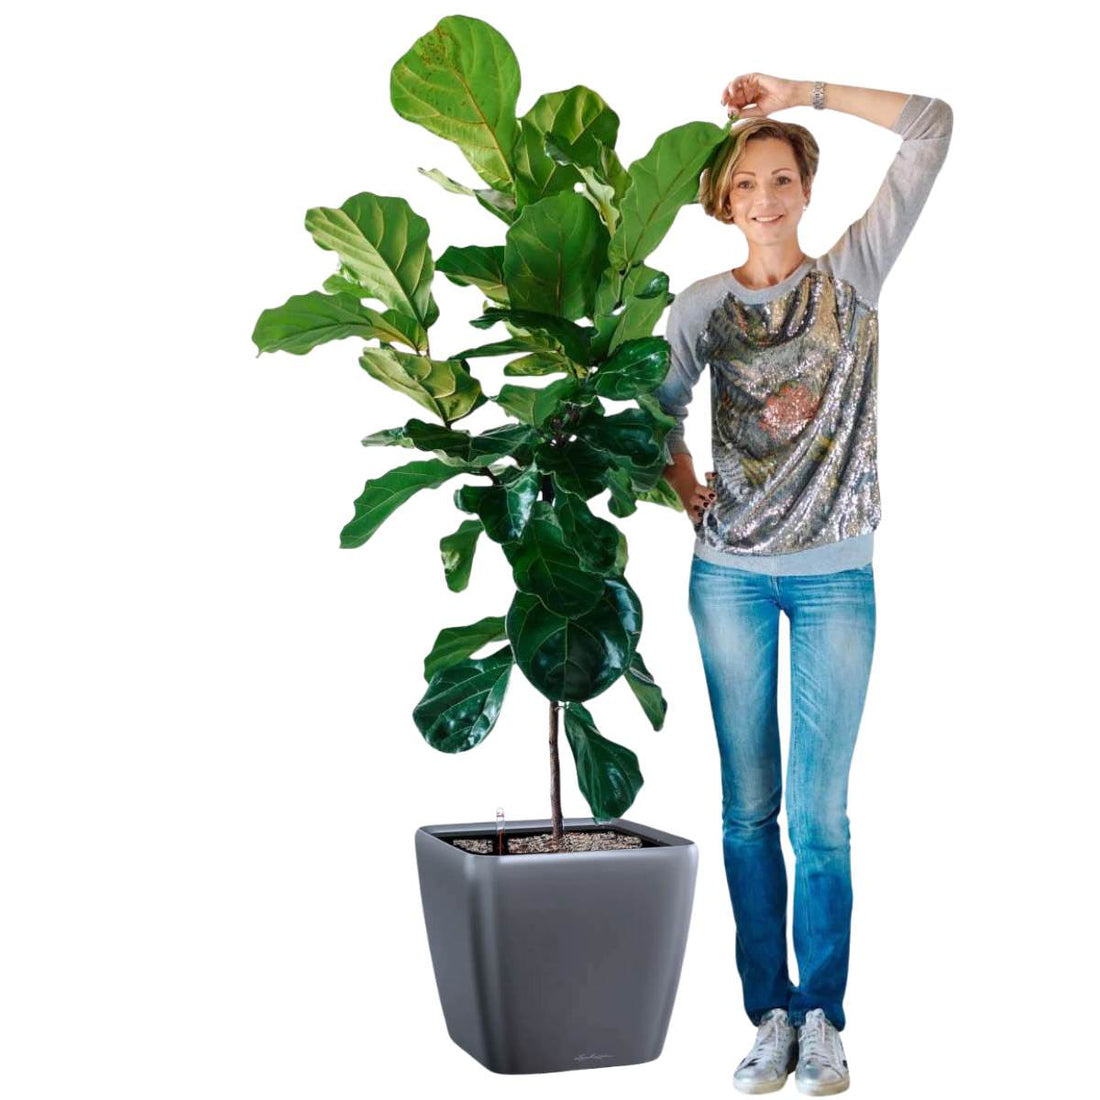 Fiddle Leaf Fig Tree Potted In Lechuza Quadro 50 Planter - Charcoal Metallic - My City Plants